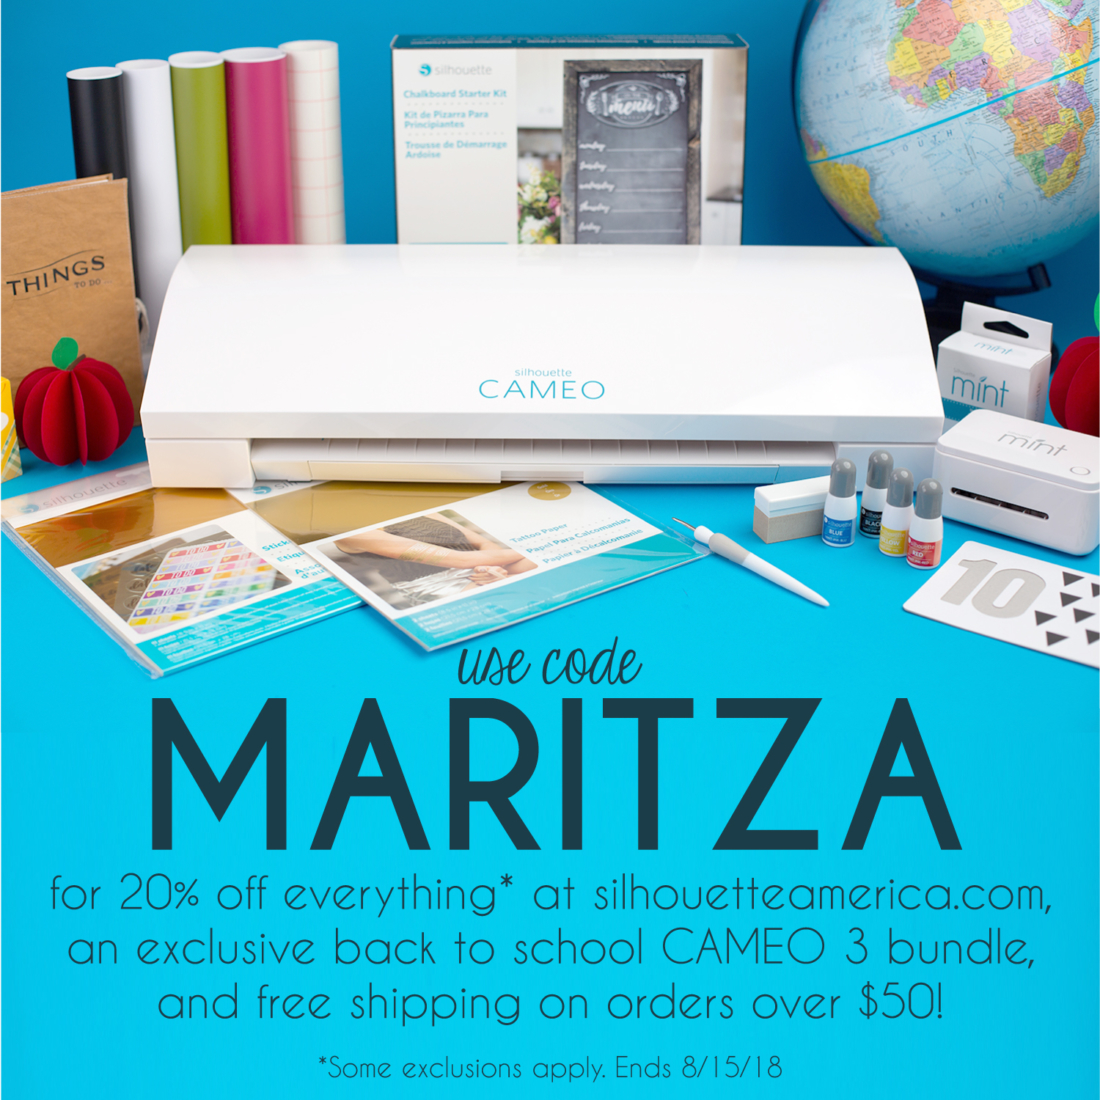 DIY Flash Card Box - Maritza Lisa - #ad Check out these back to school deals at Silhouette America! #kids #backtoschool #silhouettecameo #papercrafts #schoolsupplies